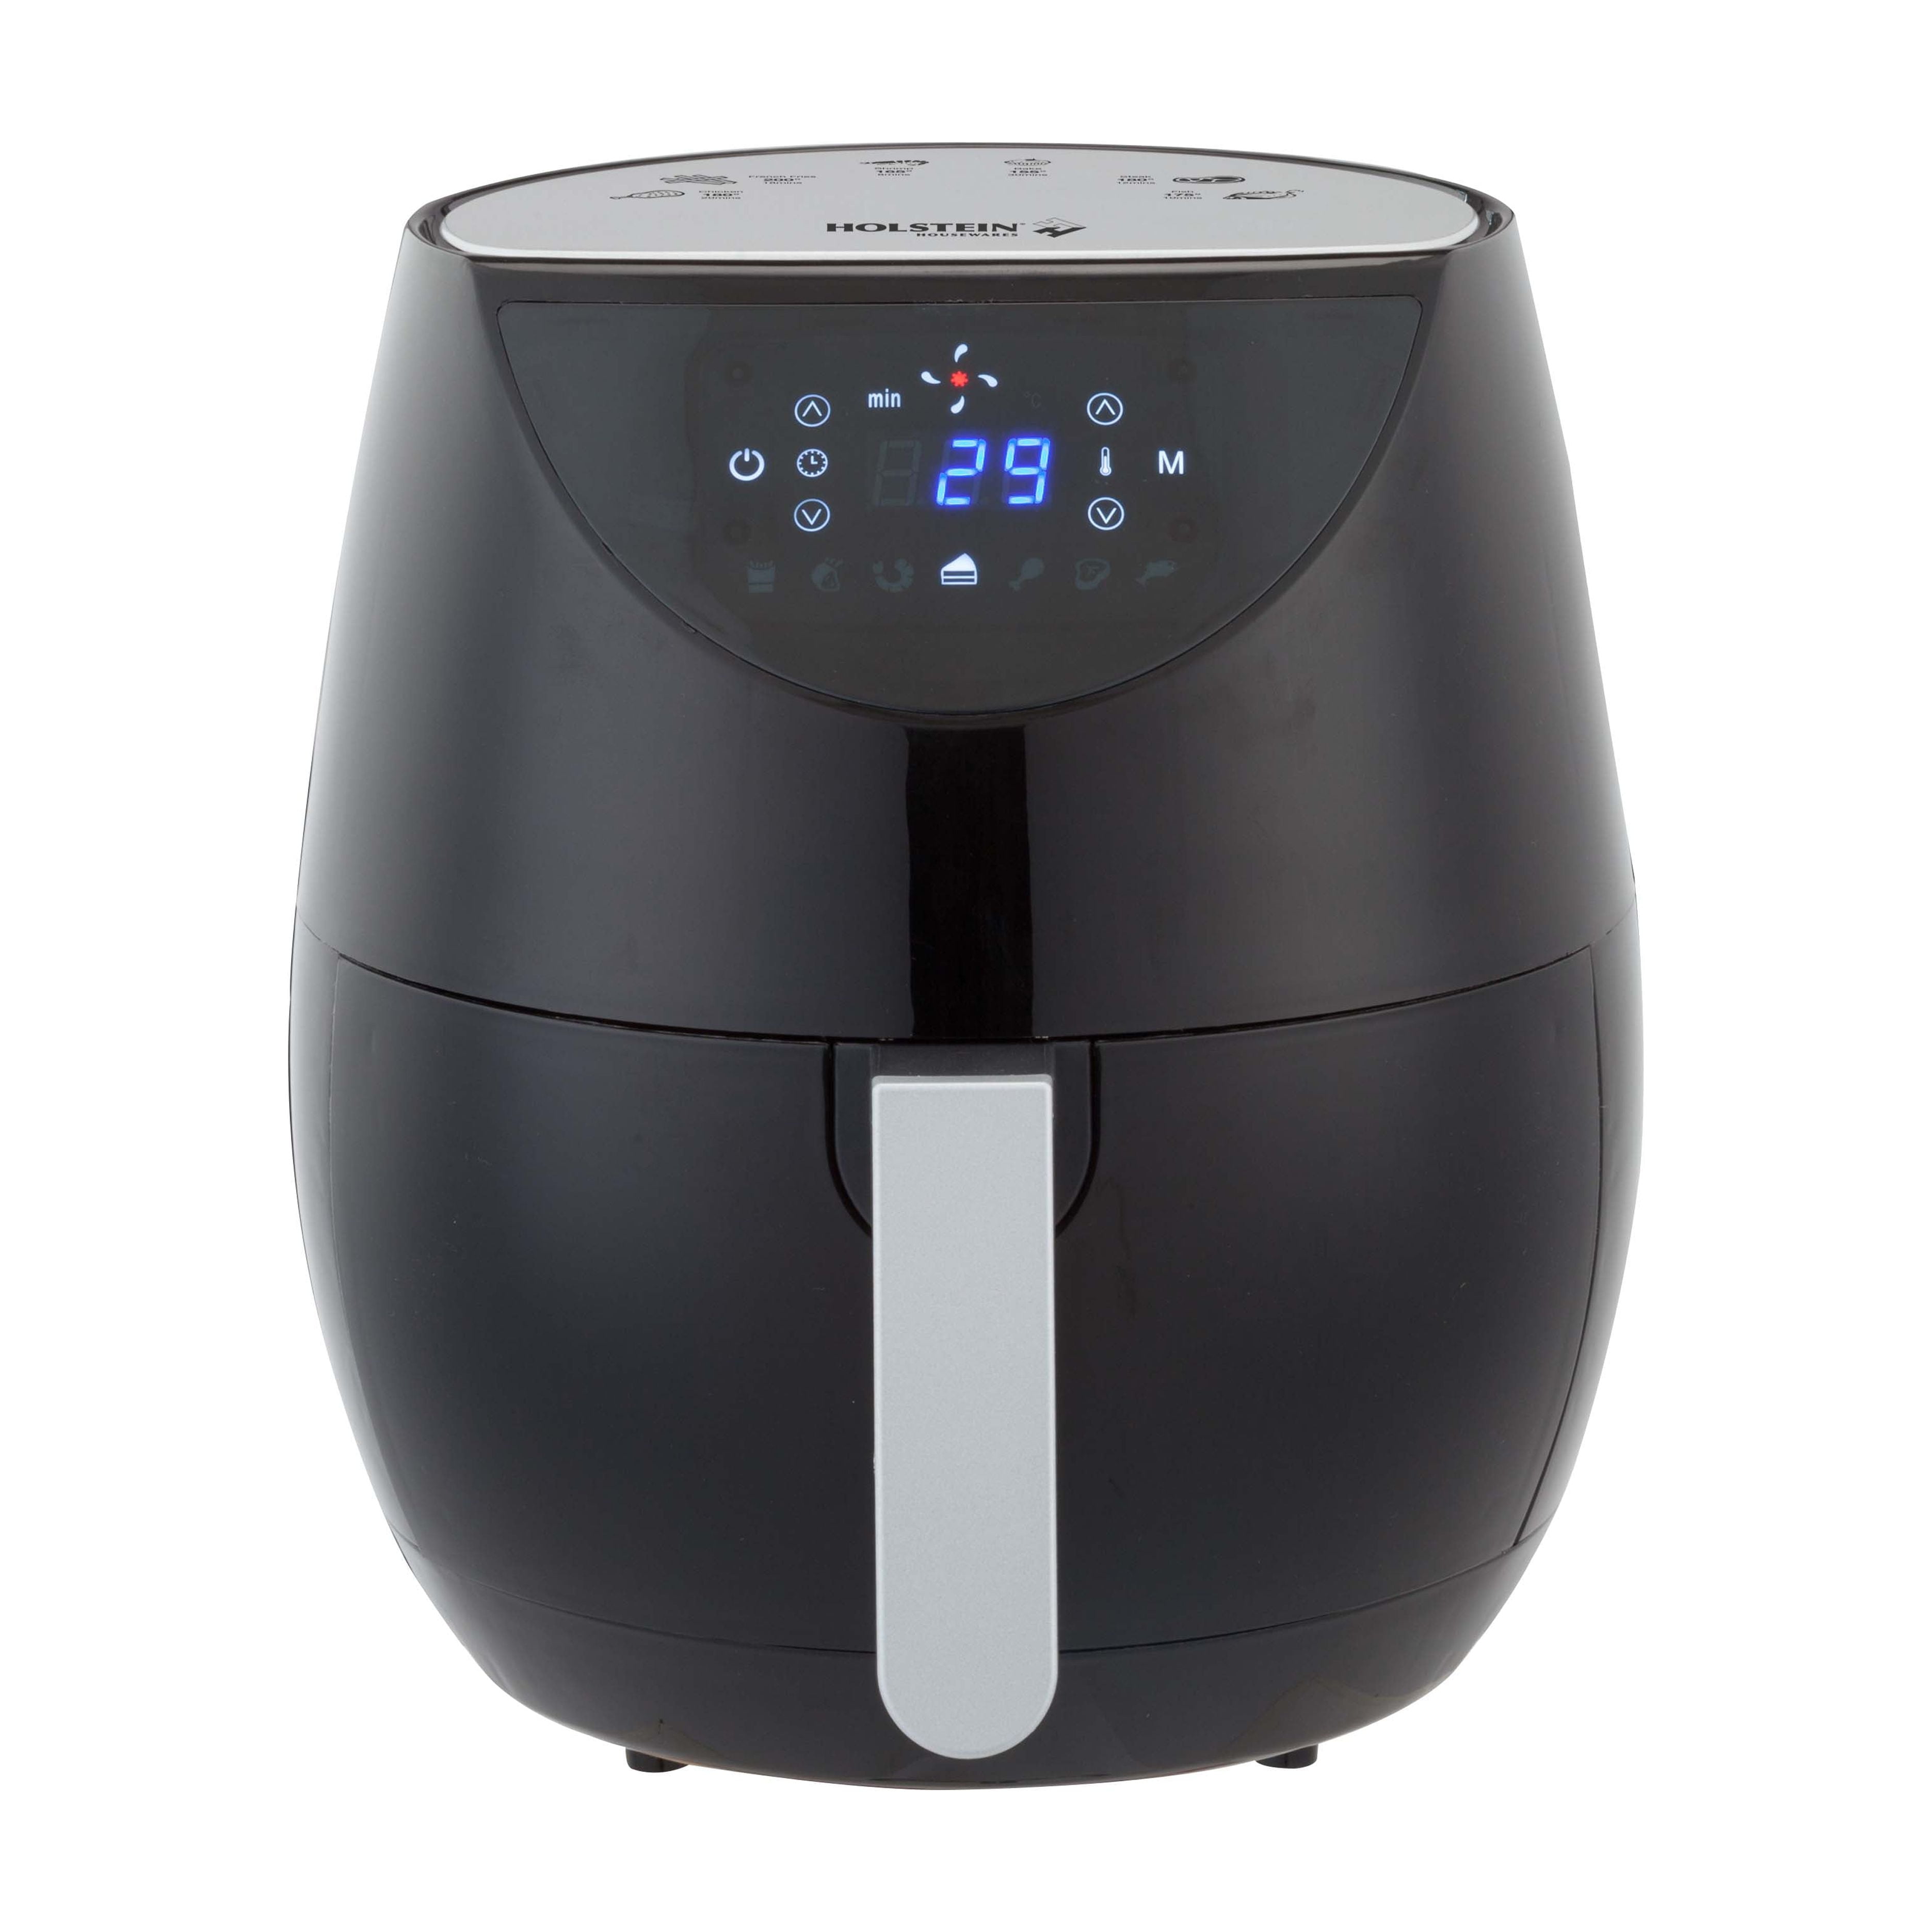 Henwenr 6 Qt Air Fryer Non-Stick Basket with Deluxe Temperature